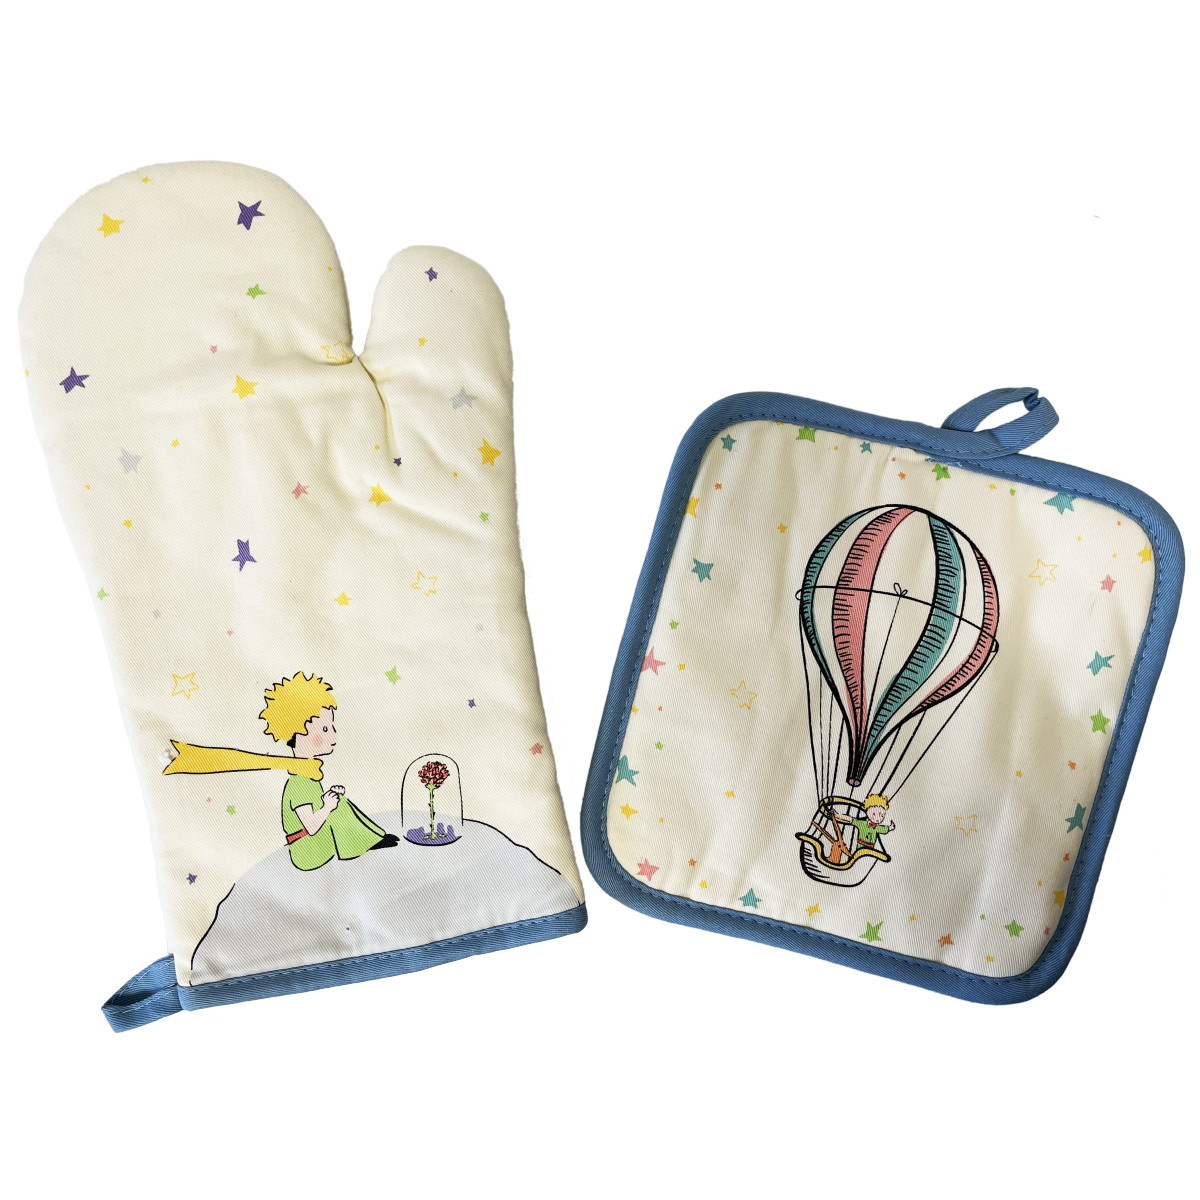 Cotton glove and pot holder The Little Prince by St Exupéry